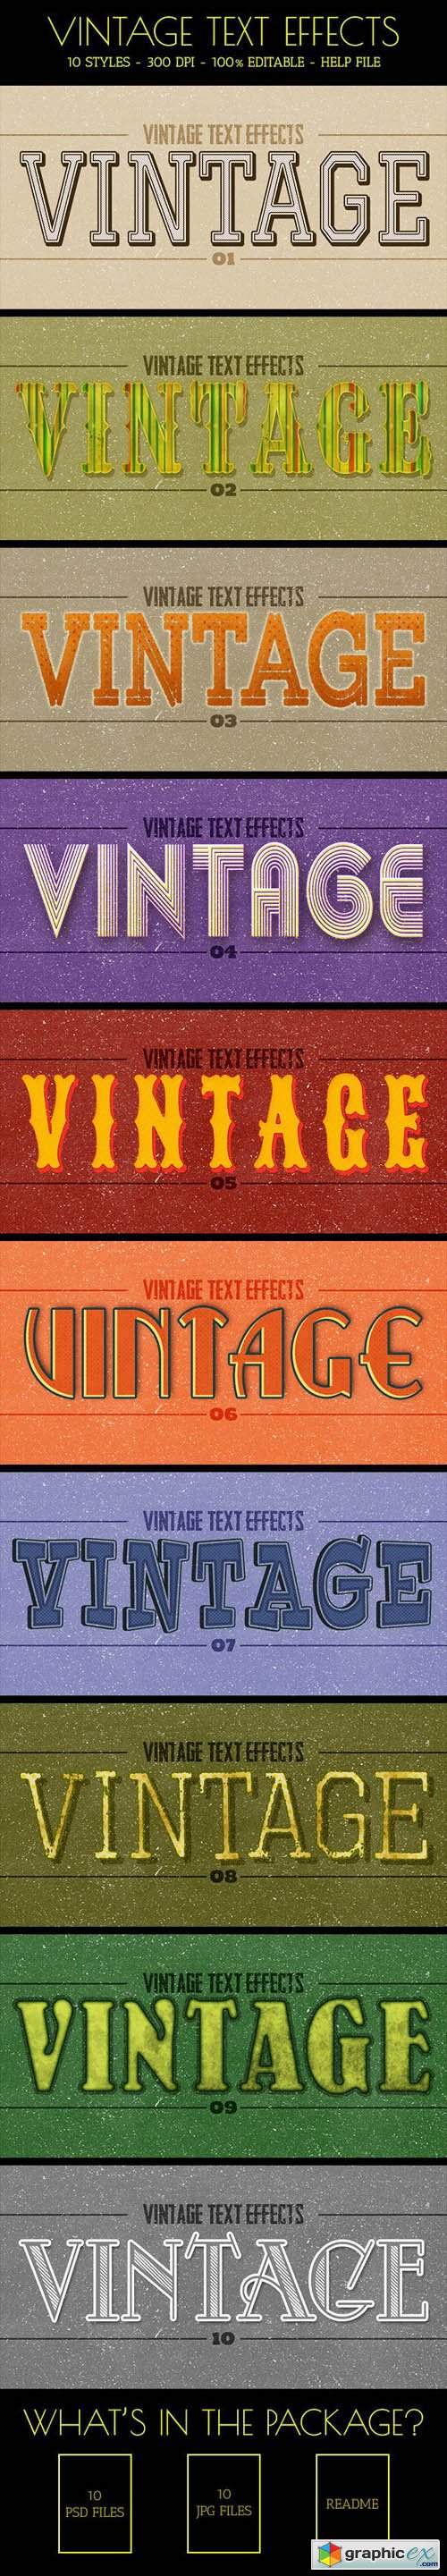 Vintage Text Effects - 10 Styles